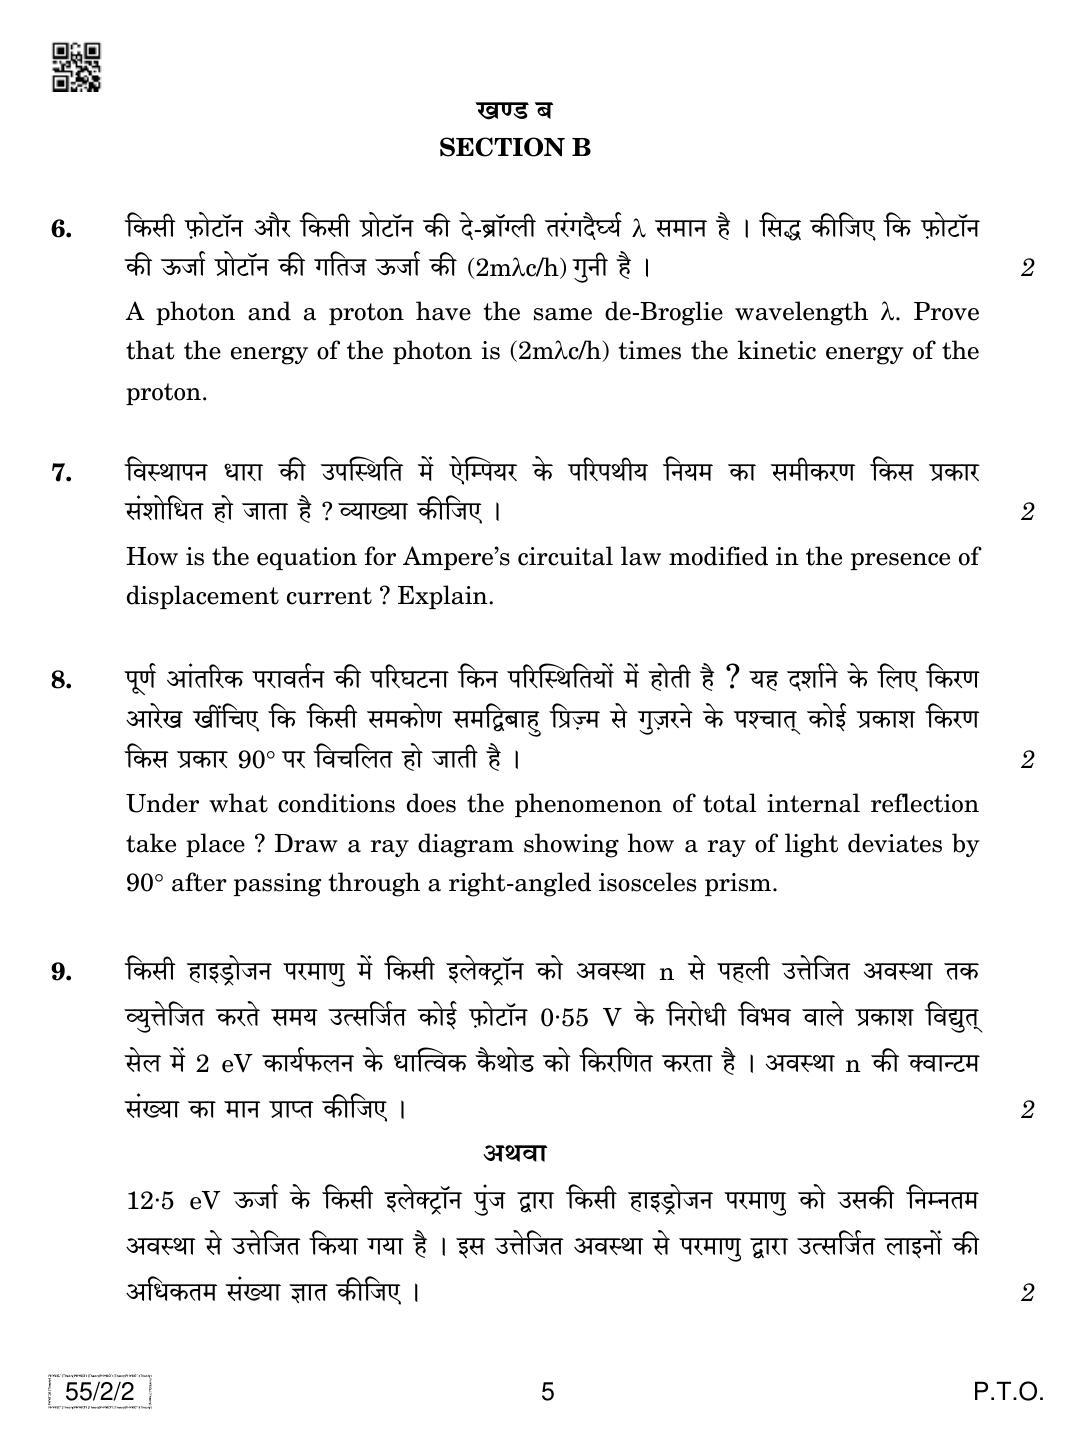 CBSE Class 12 55-2-2 Physics 2019 Question Paper - Page 5